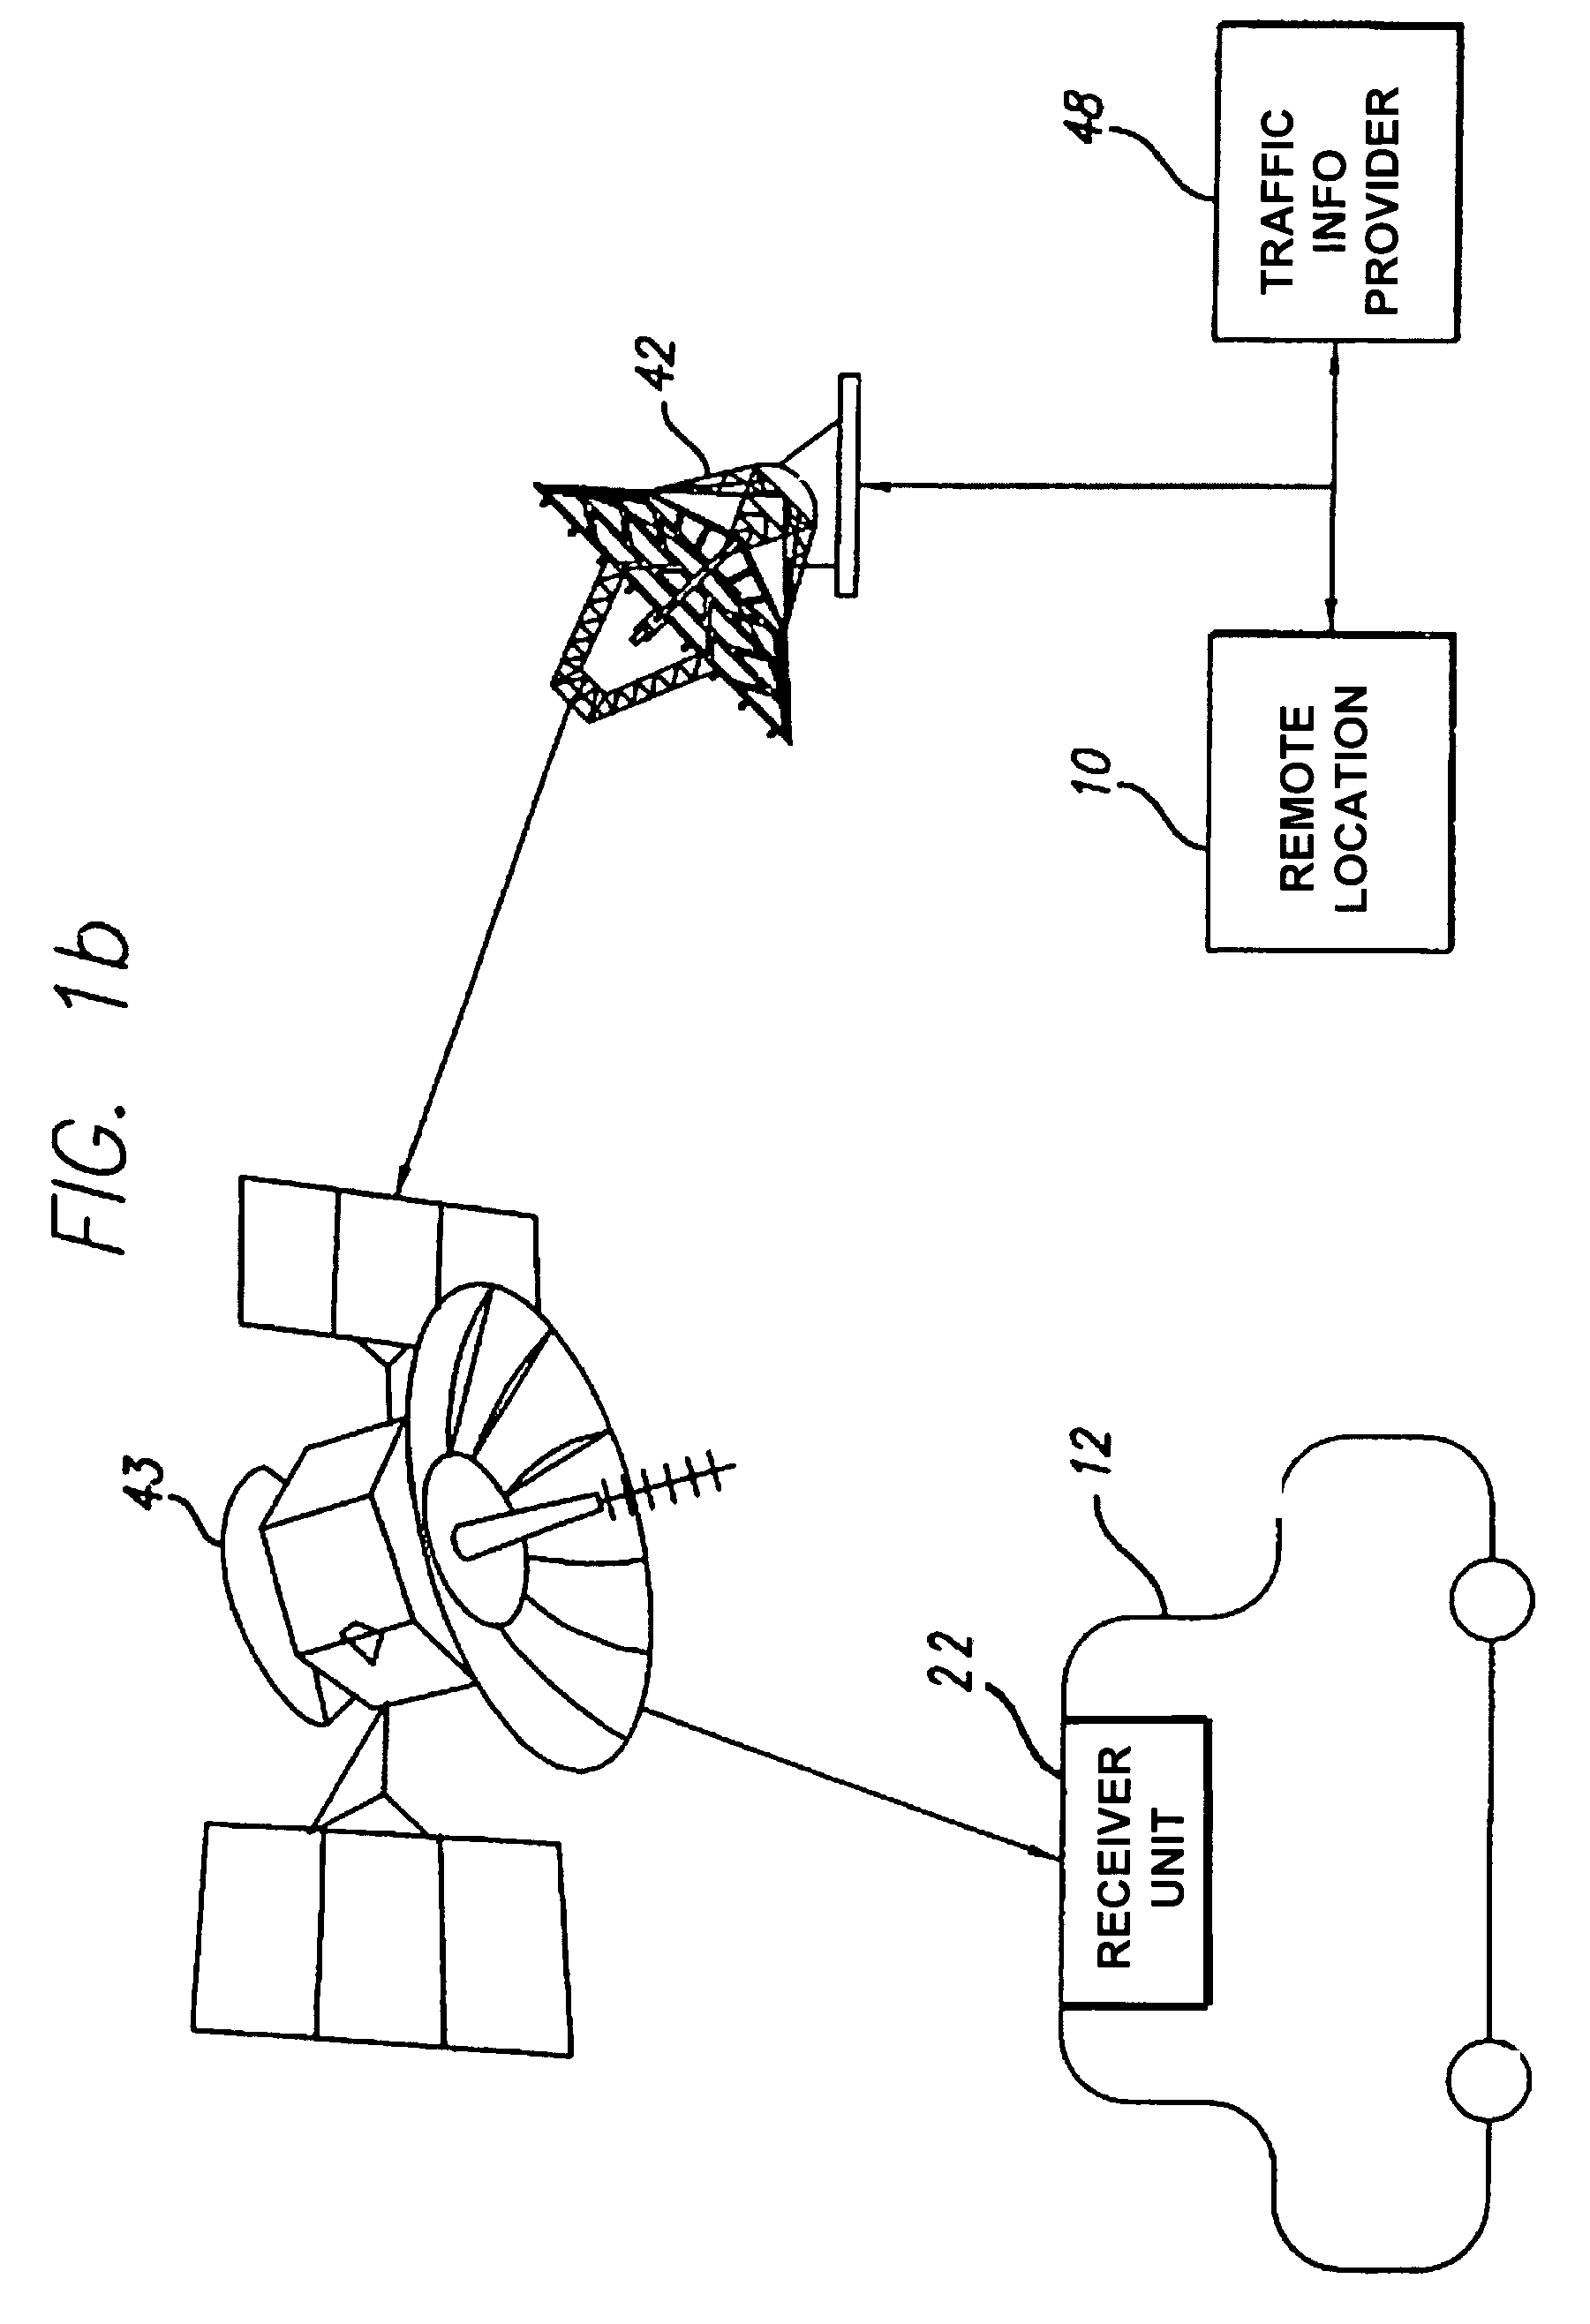 Methods for filtering and providing traffic information